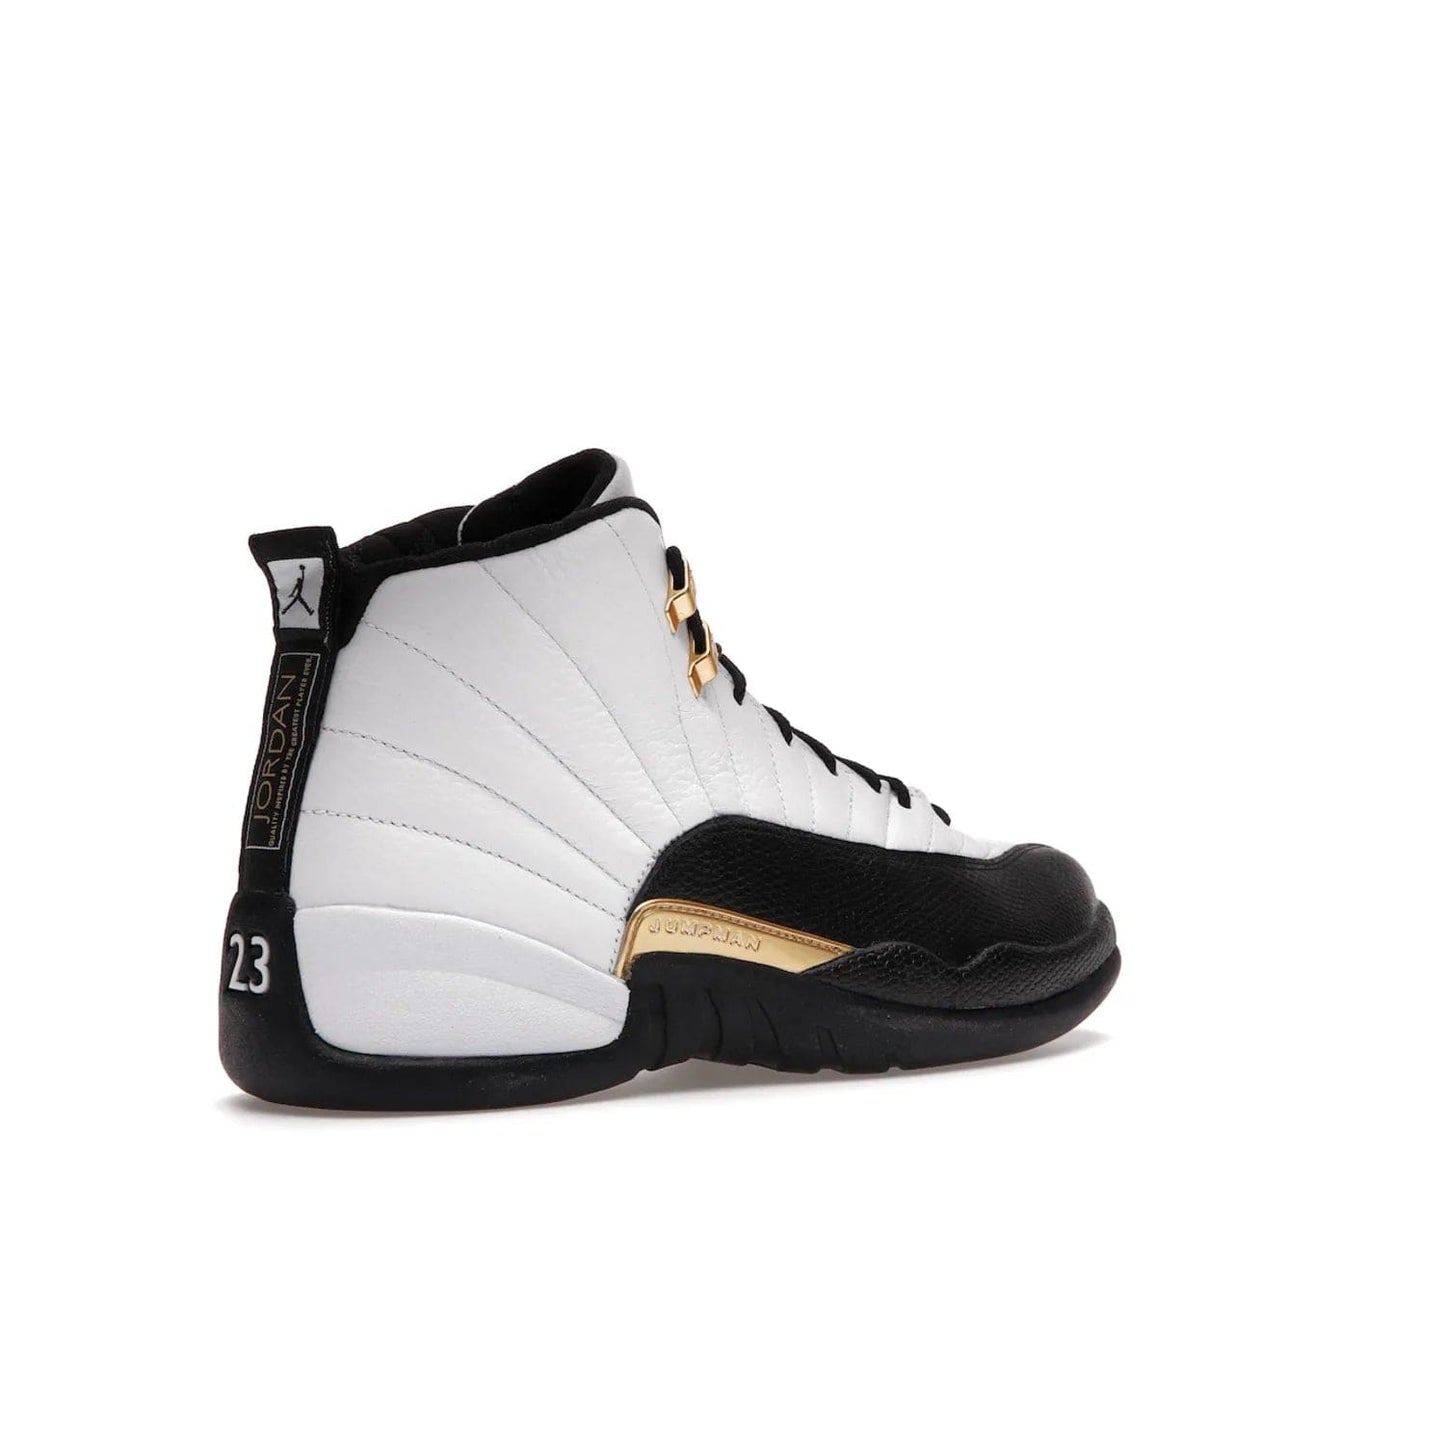 Jordan 12 Retro Royalty Taxi - Image 33 - Only at www.BallersClubKickz.com - Make a statement with the Air Jordan 12 Retro Royalty Taxi. Woven heel tag, gold plaquet, white tumbled leather upper plus a black toe wrap, make this modern take on the classic a must-have. Available in November 2021.